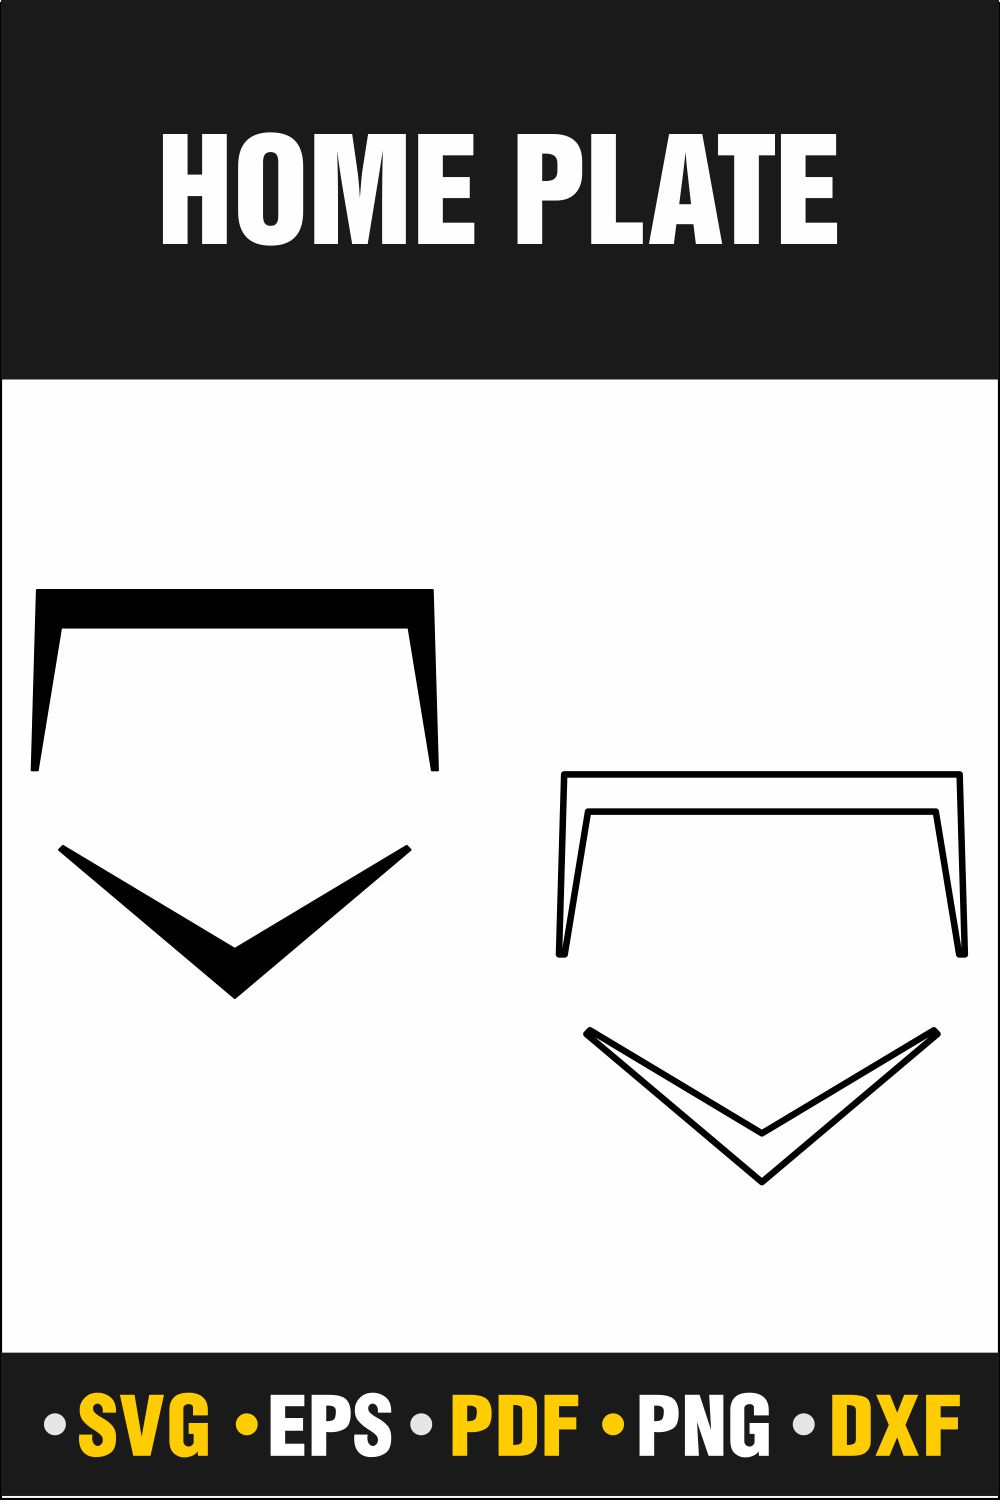 Home plate Svg, Home plate, Home plate Outline Svg, Home plate Png, Home plate Outline Png, HOme Svg, Instant Download Vector Cut file Cricut, Silhouette, Pdf Png, Dxf, Decal pinterest preview image.